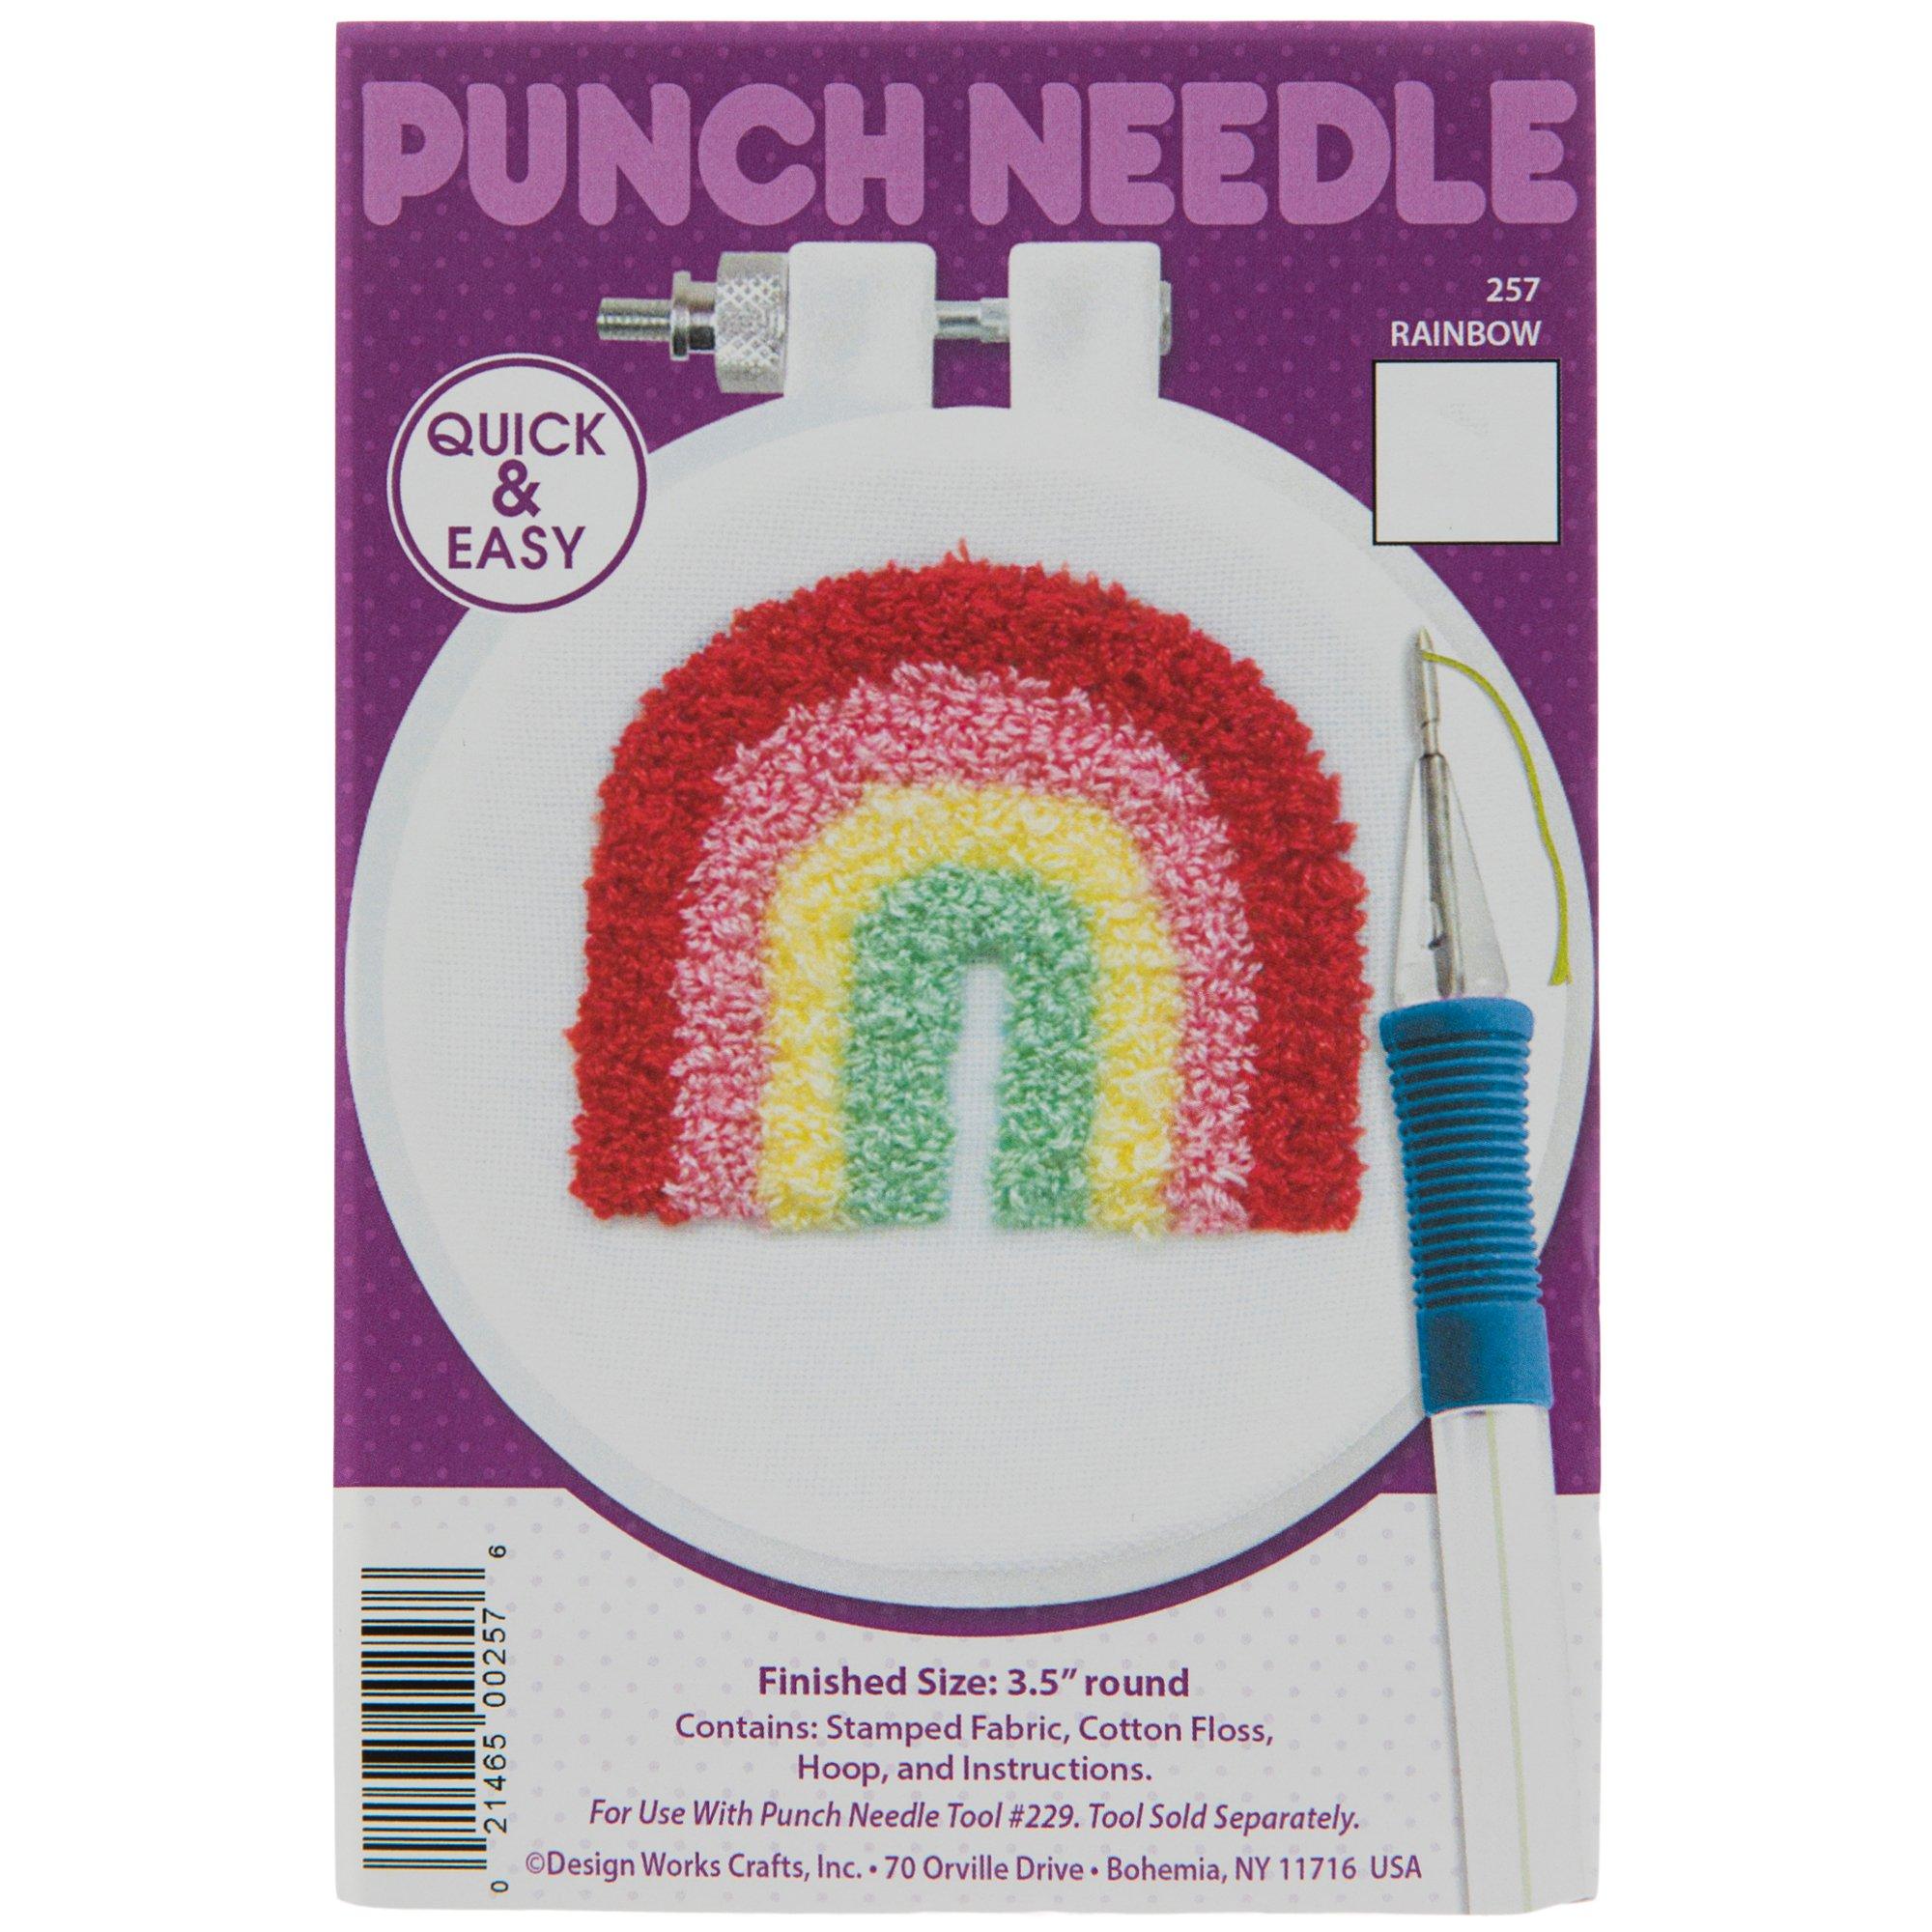  Feltsky Rainbow Punch Needle Kit for Beginners, Including 8  INCH Hoop, Pattern, Cotton Threads, Punch Needles, Needle Threader,  Instruction : Arts, Crafts & Sewing